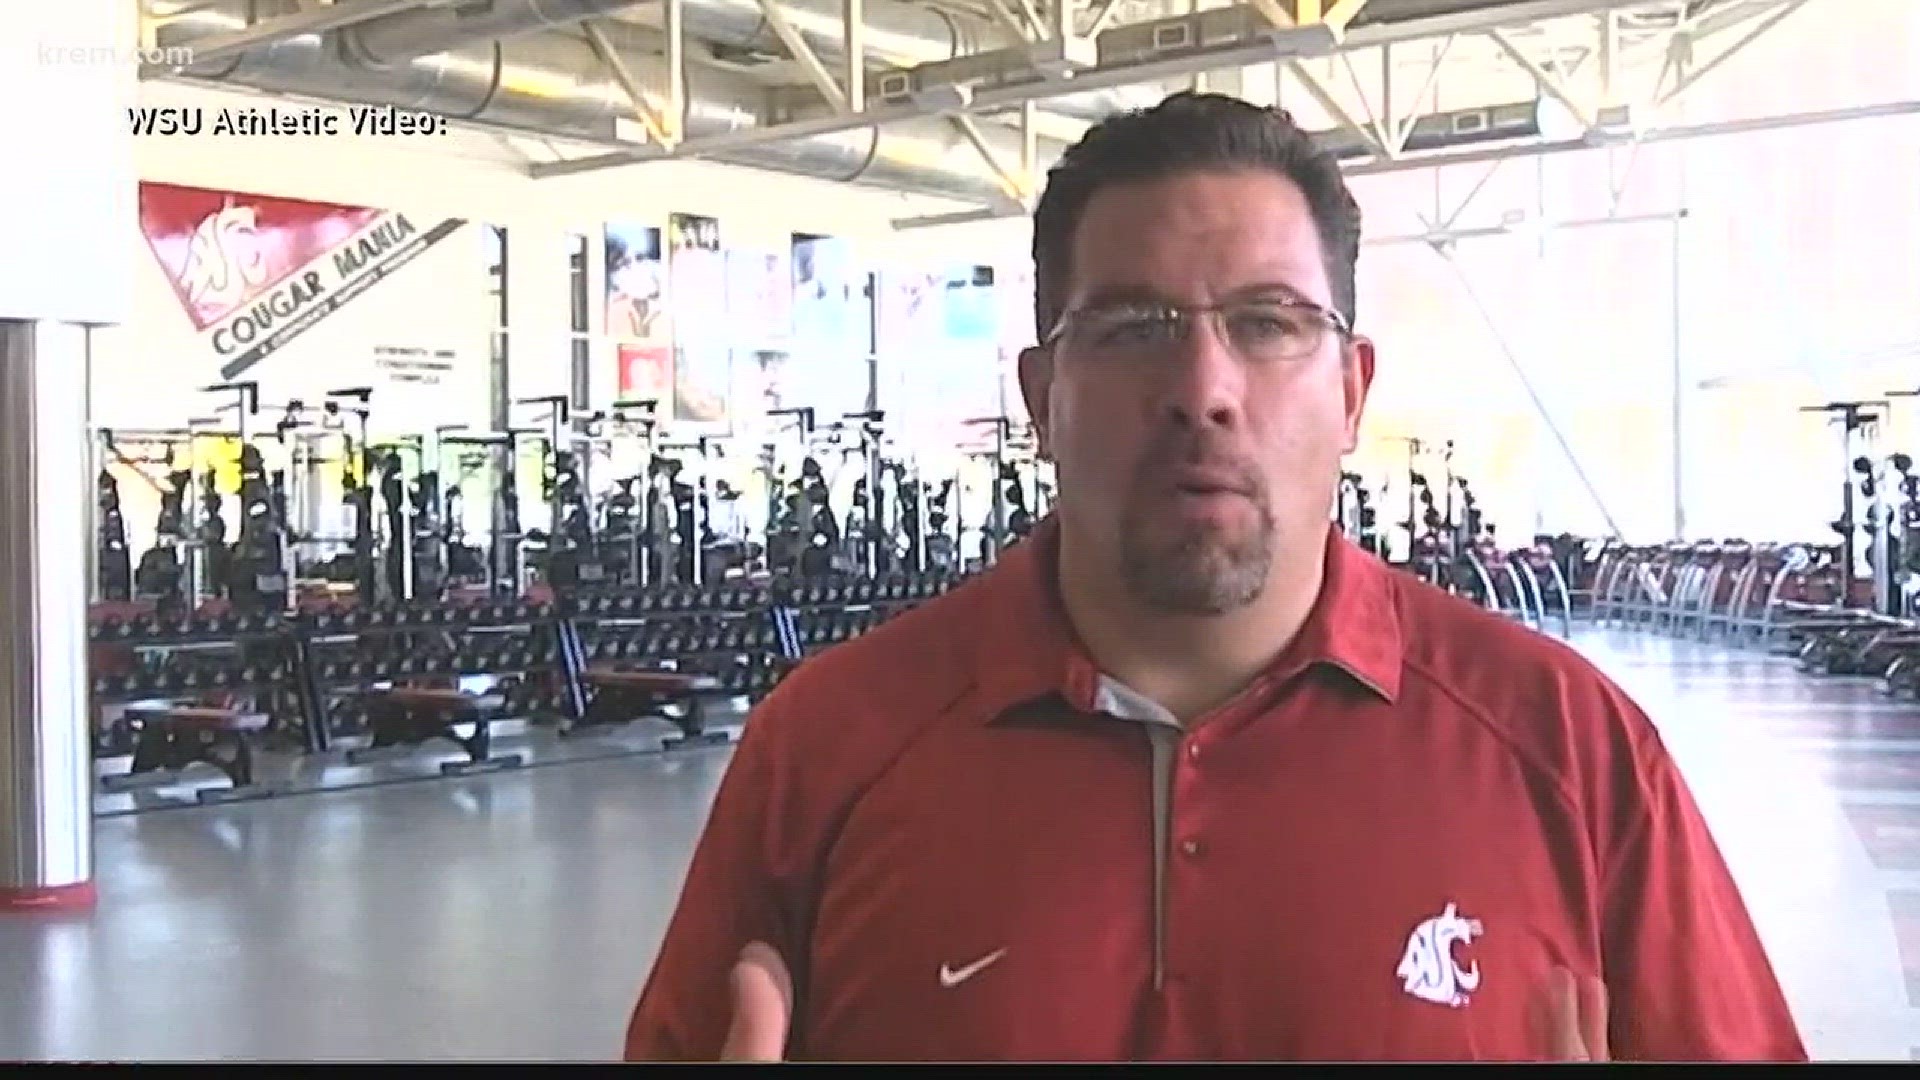 KREM 2's Danamarie McNicholl has the response from his family and the WSU athletic community after this tragic loss.